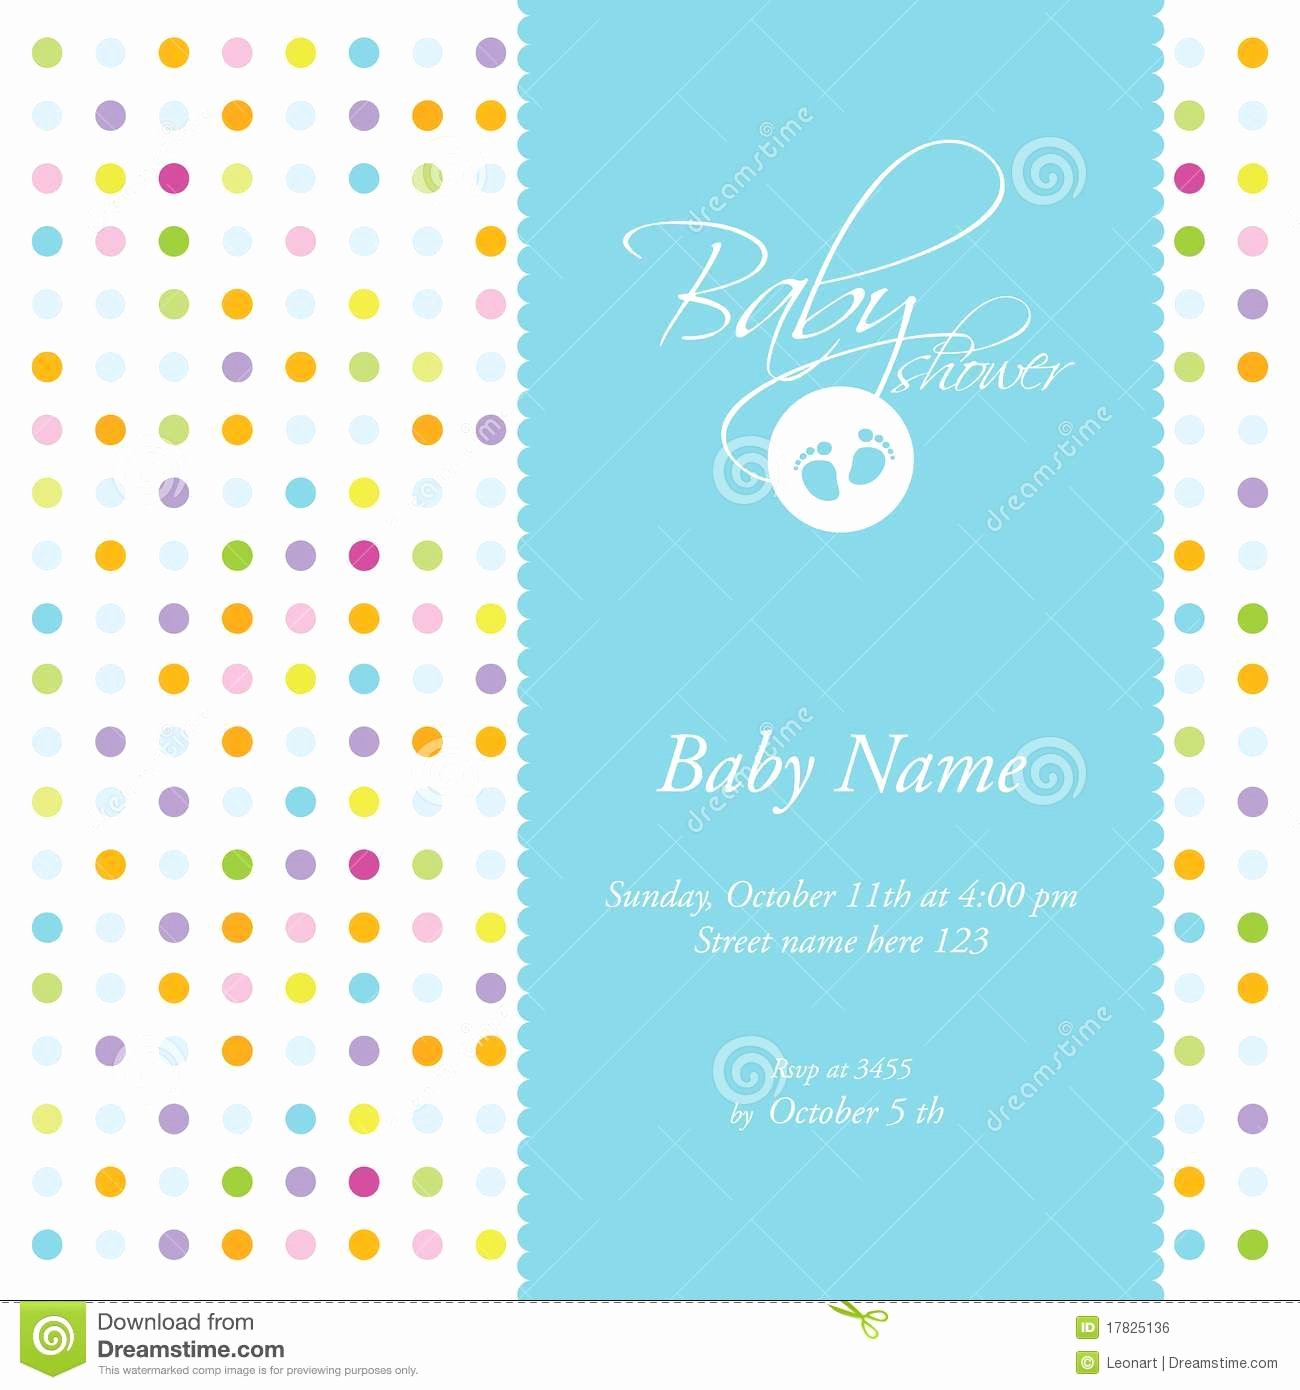 Baby Shower Card Template New Baby Shower Card Template Stock Vector Illustration Of